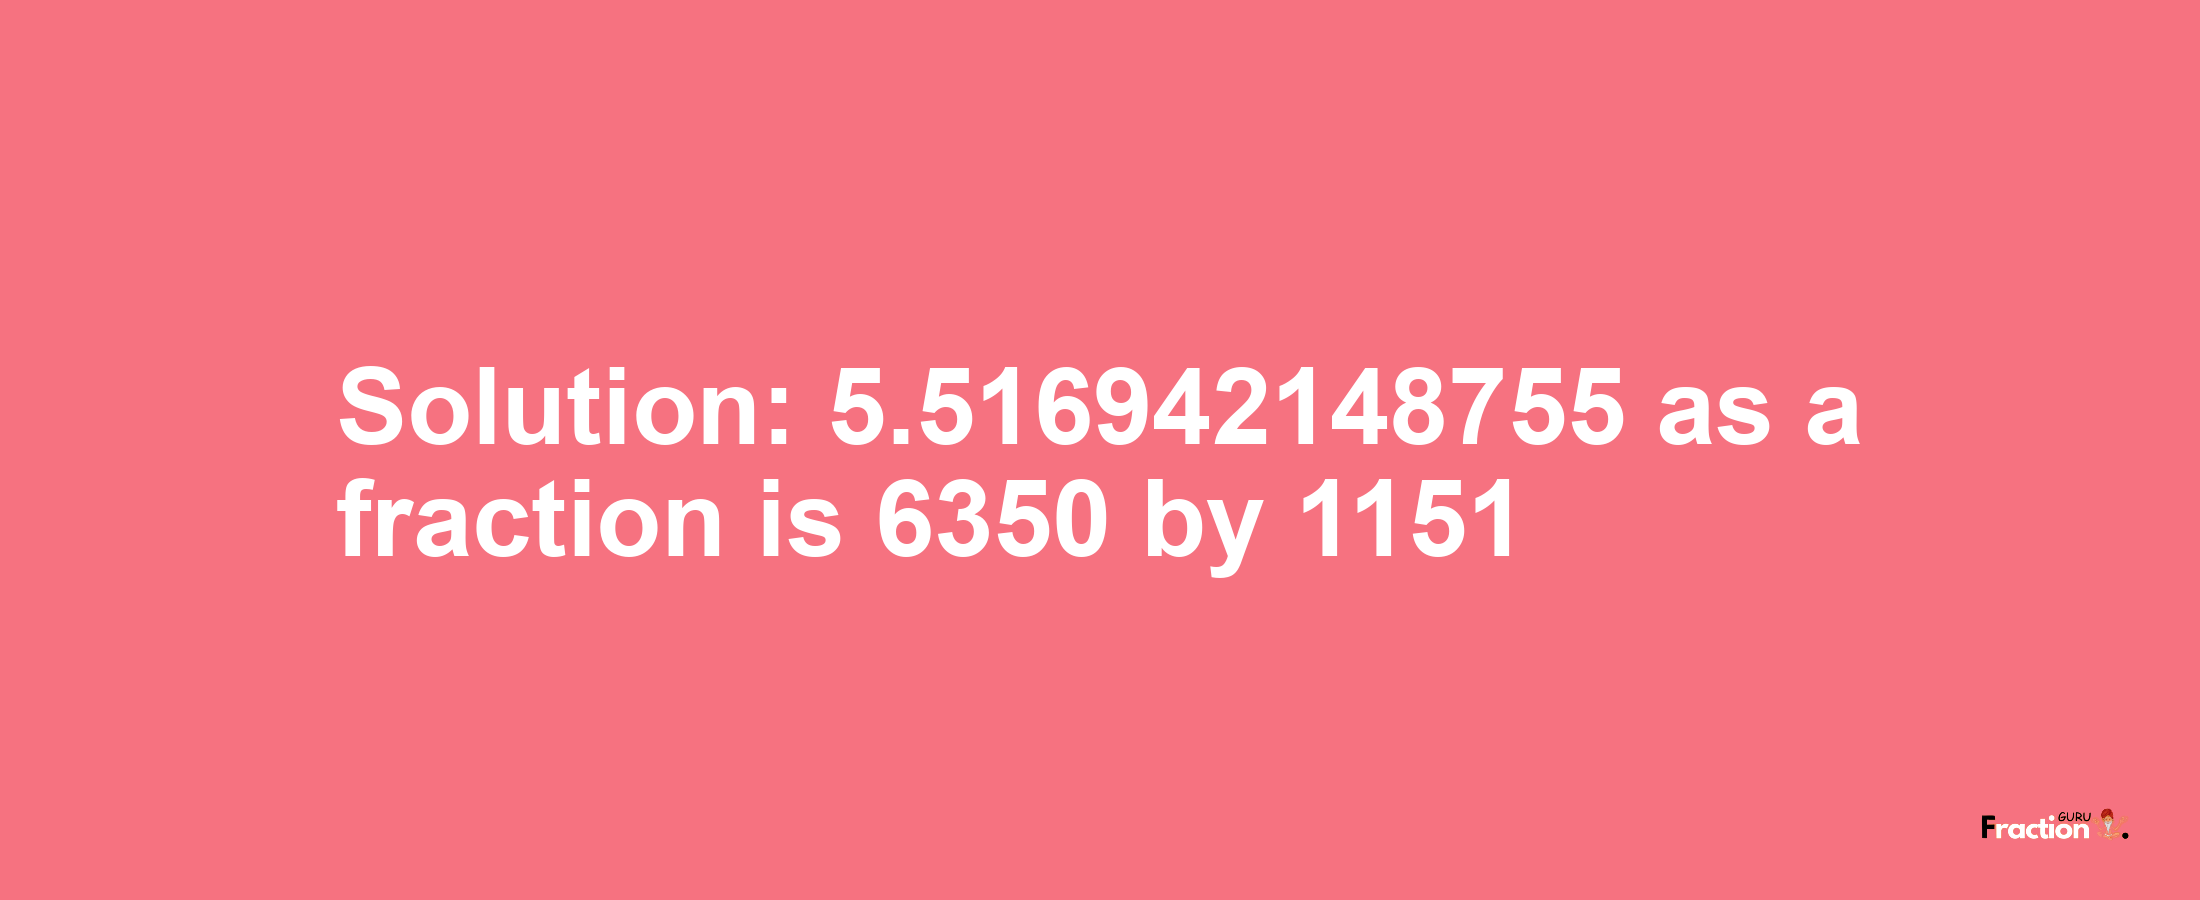 Solution:5.516942148755 as a fraction is 6350/1151